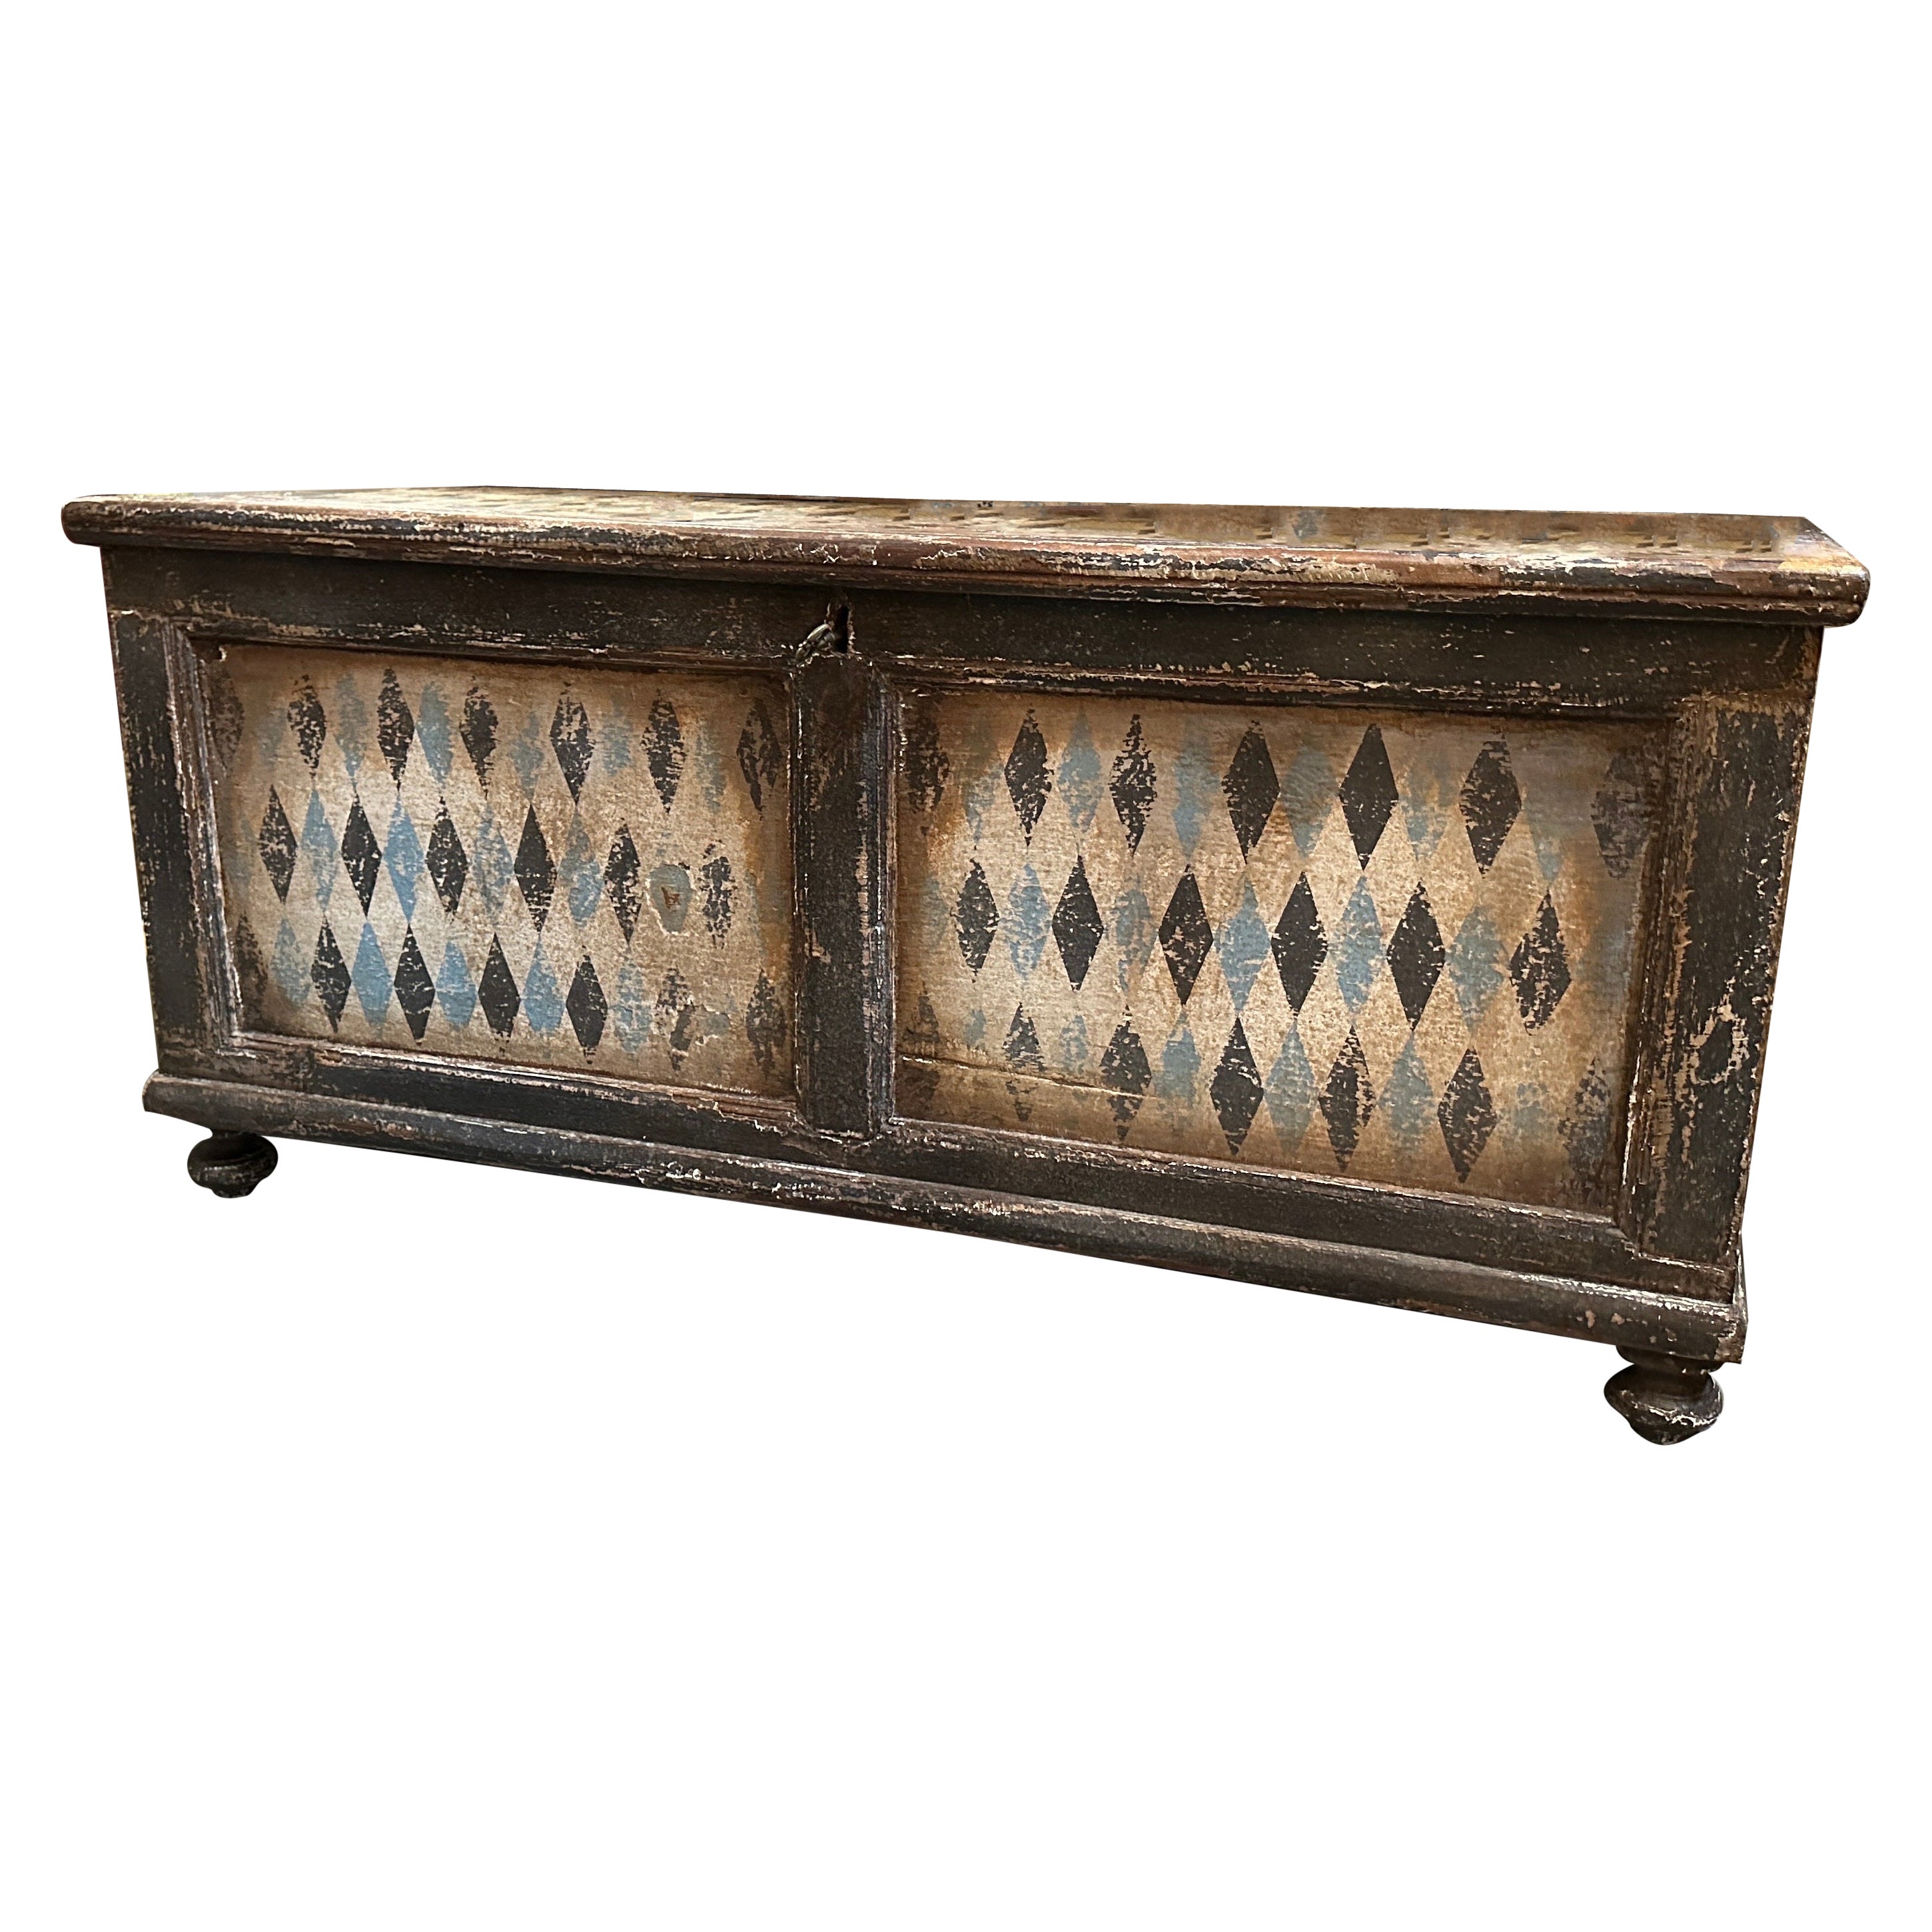 19th Century Blue Black and White Lacquered Wood Florentine Blanket Chest For Sale